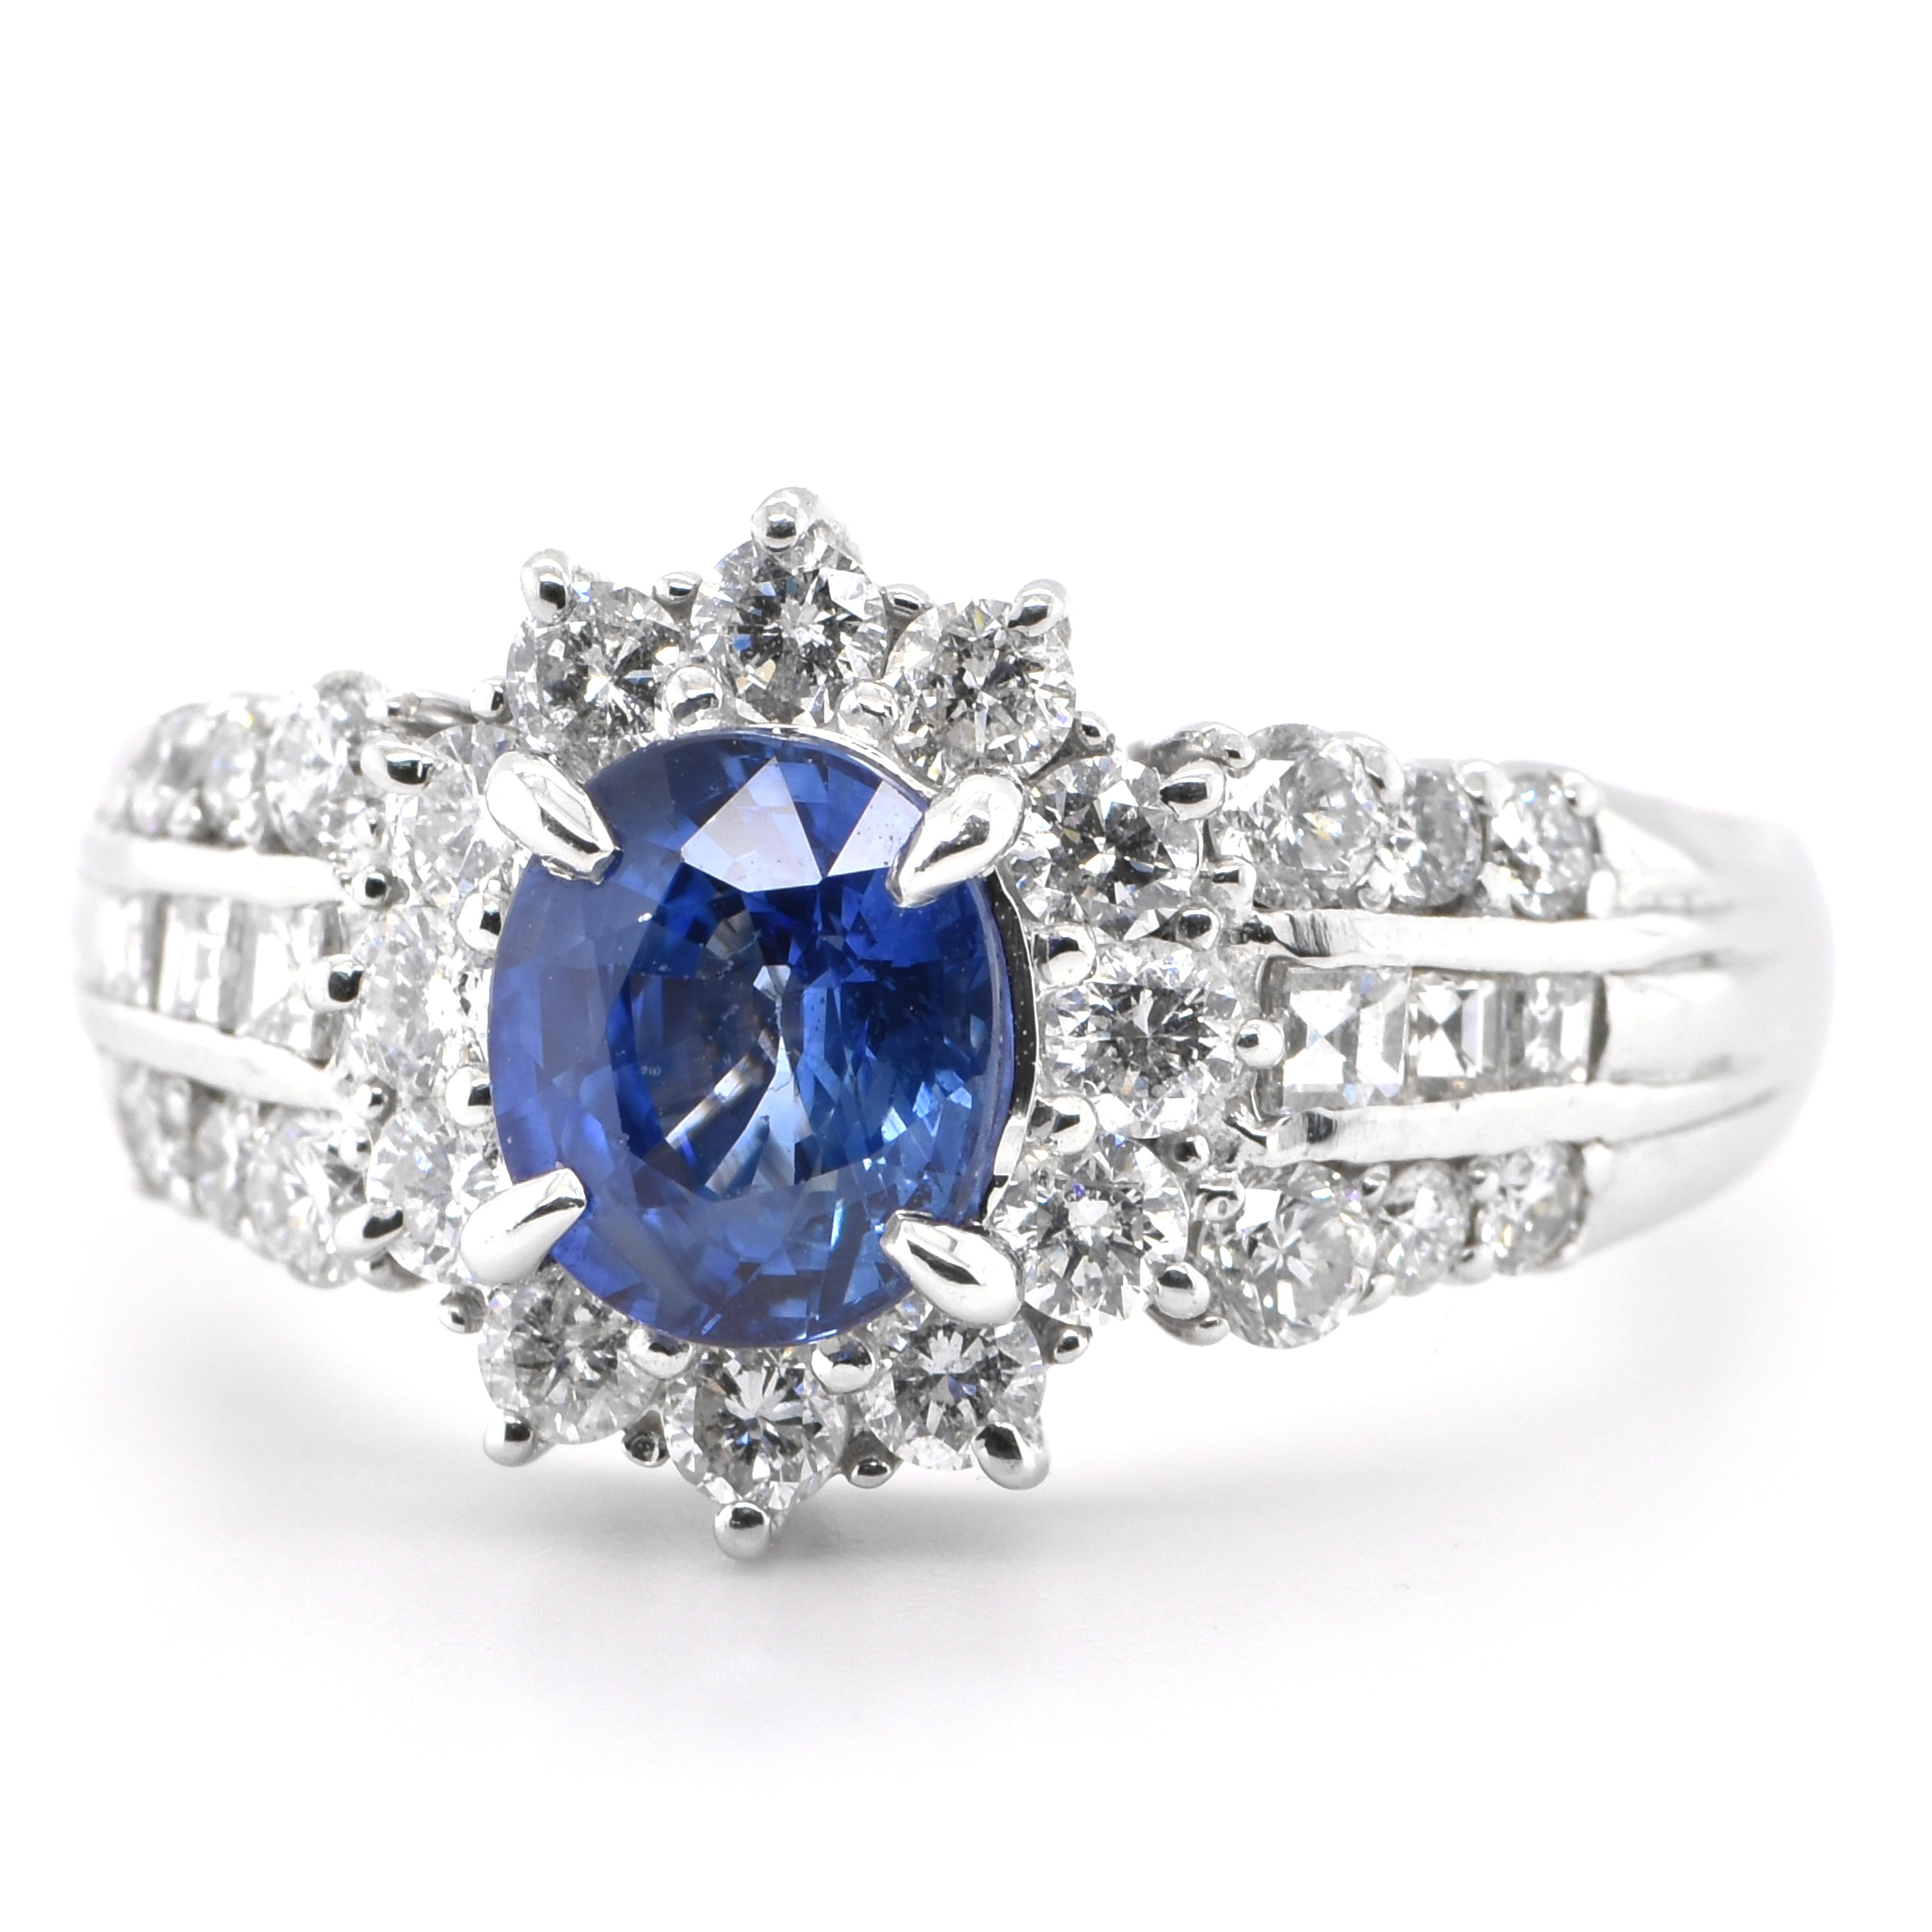 A beautiful ring featuring a 1.64 Carat Natural Blue Sapphire and 1.00 Carats Diamond Accents set in Platinum. Sapphires have extraordinary durability - they excel in hardness as well as toughness and durability making them very popular in jewelry.